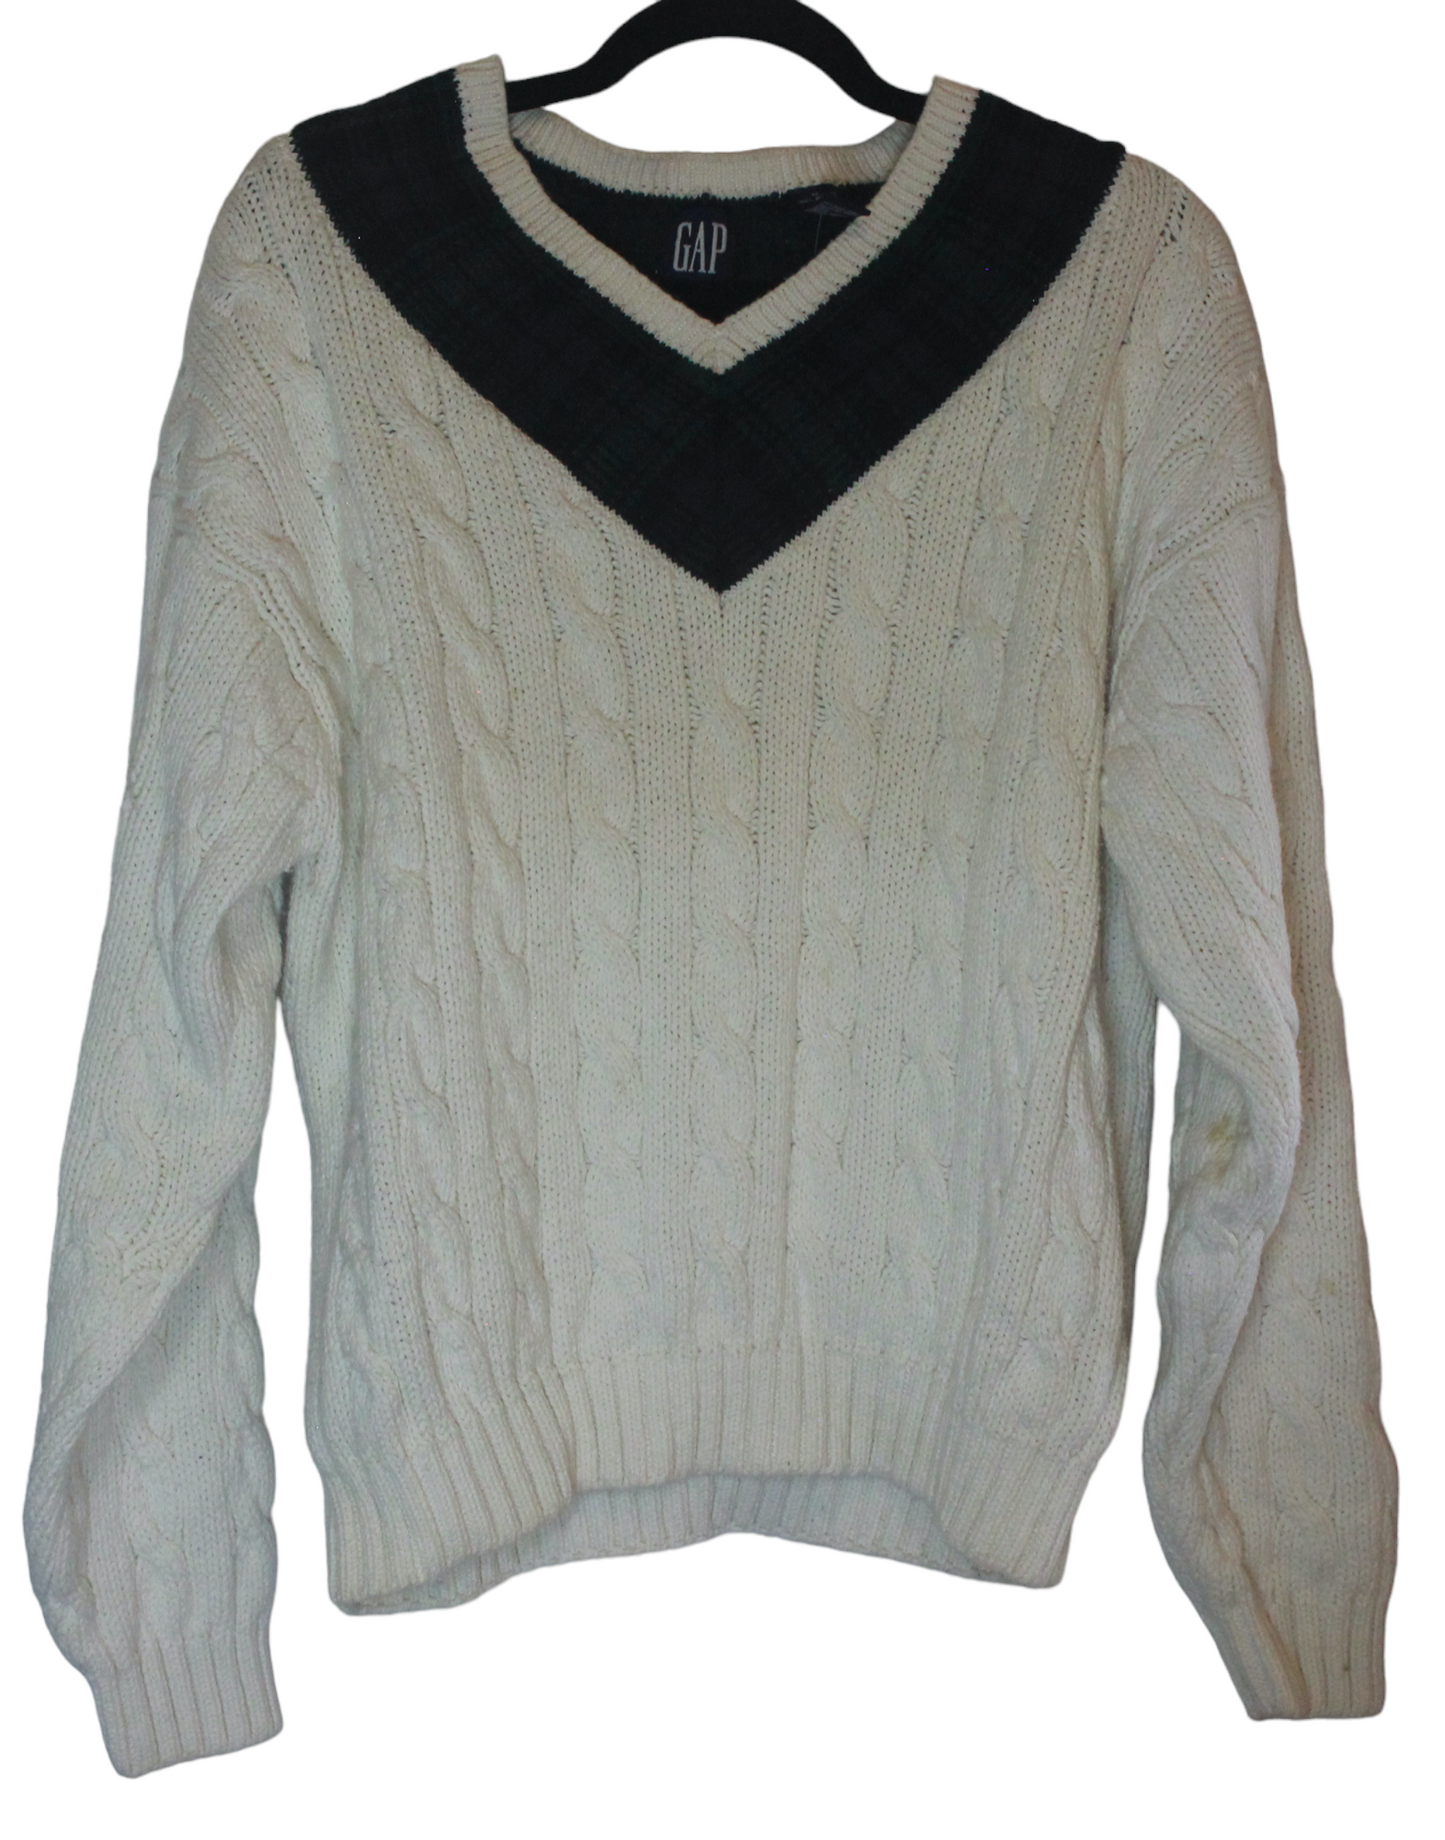 GAP V-Neck Cable Knit Sweater